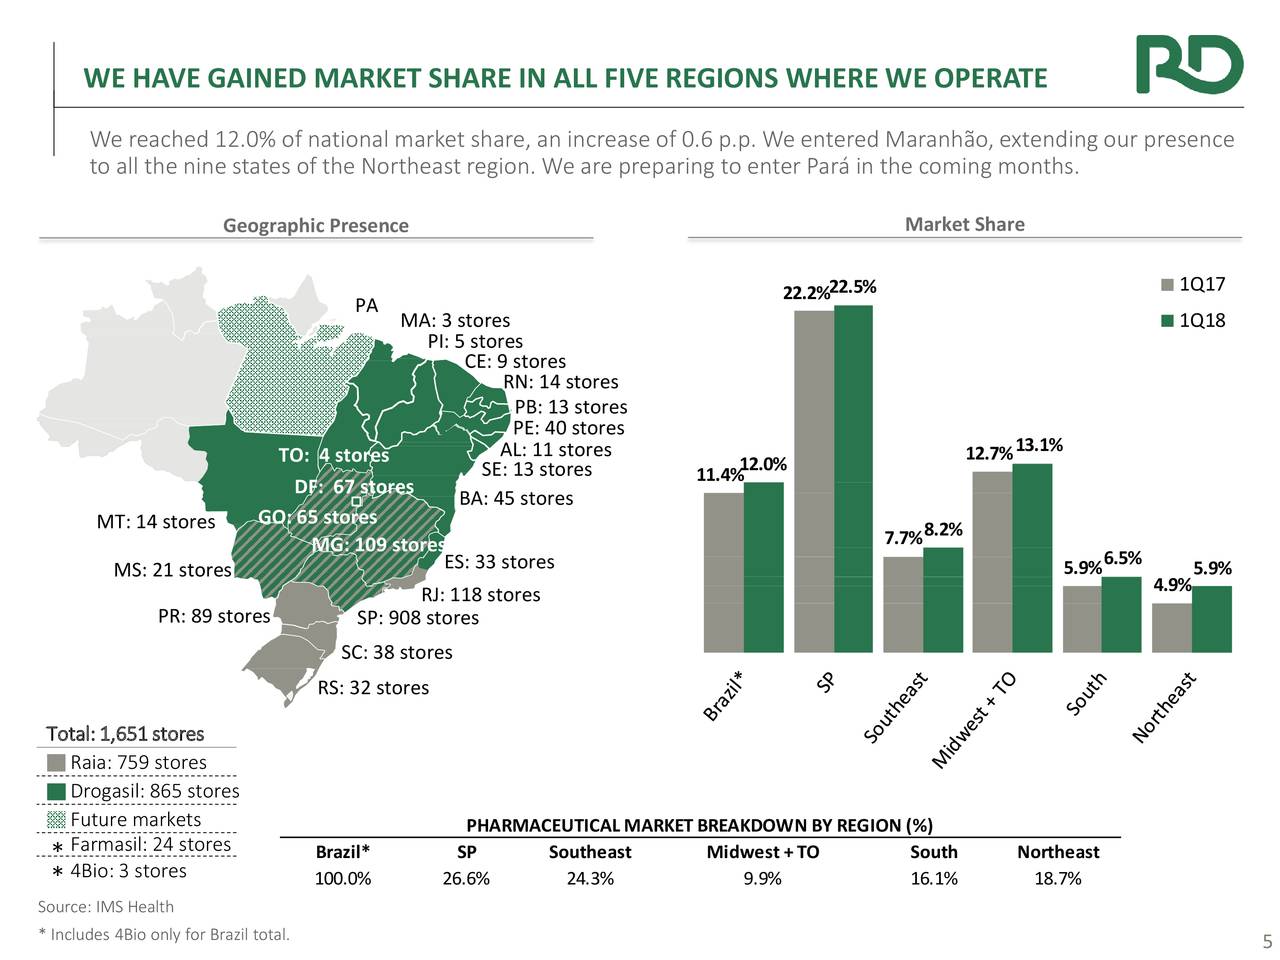 WE HAVE GAINED MARKET SHARE IN ALL FIVE REGIONS WHERE WE OPERATE